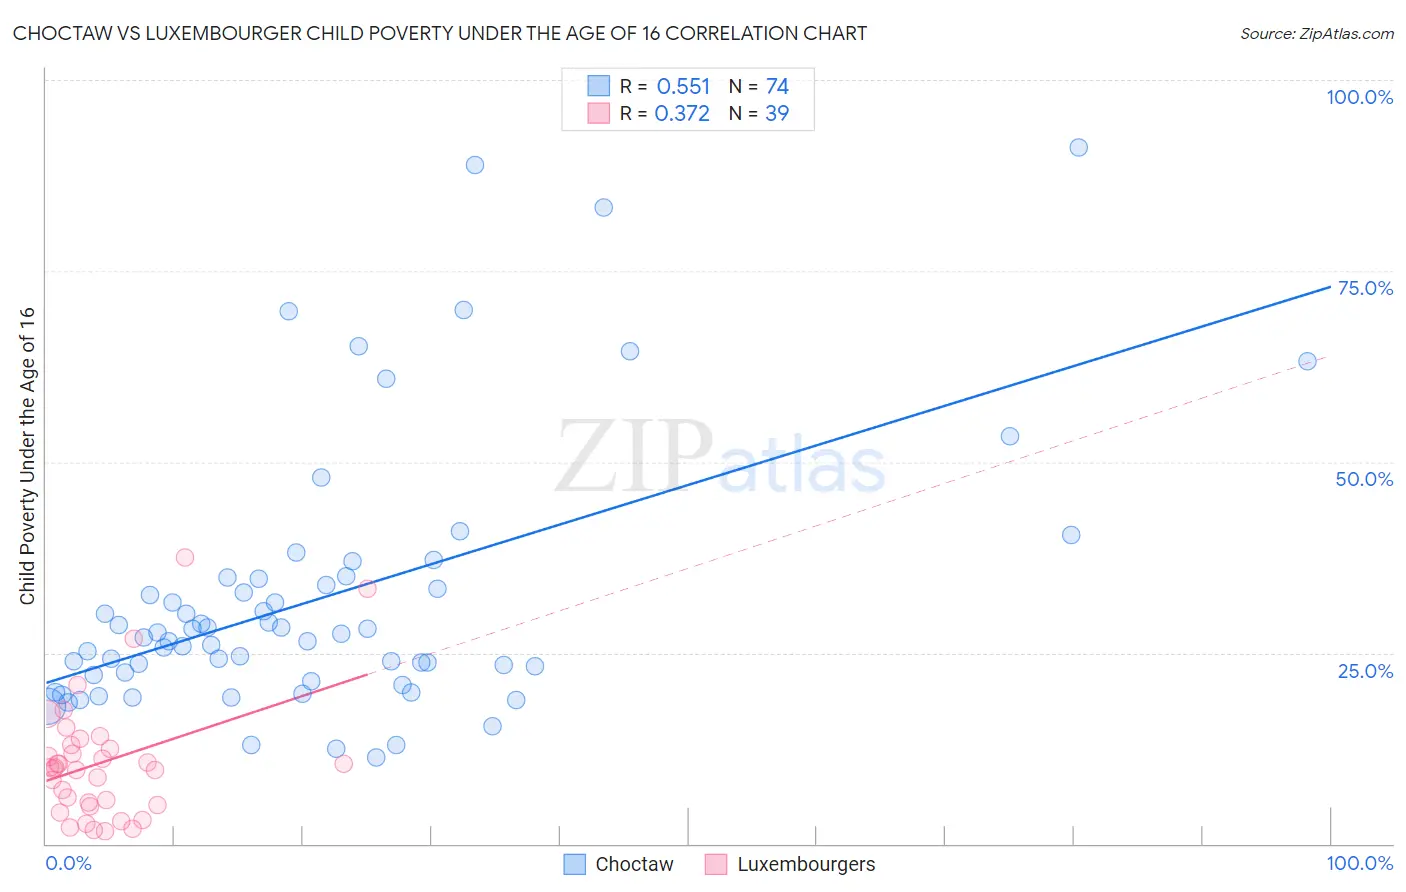 Choctaw vs Luxembourger Child Poverty Under the Age of 16